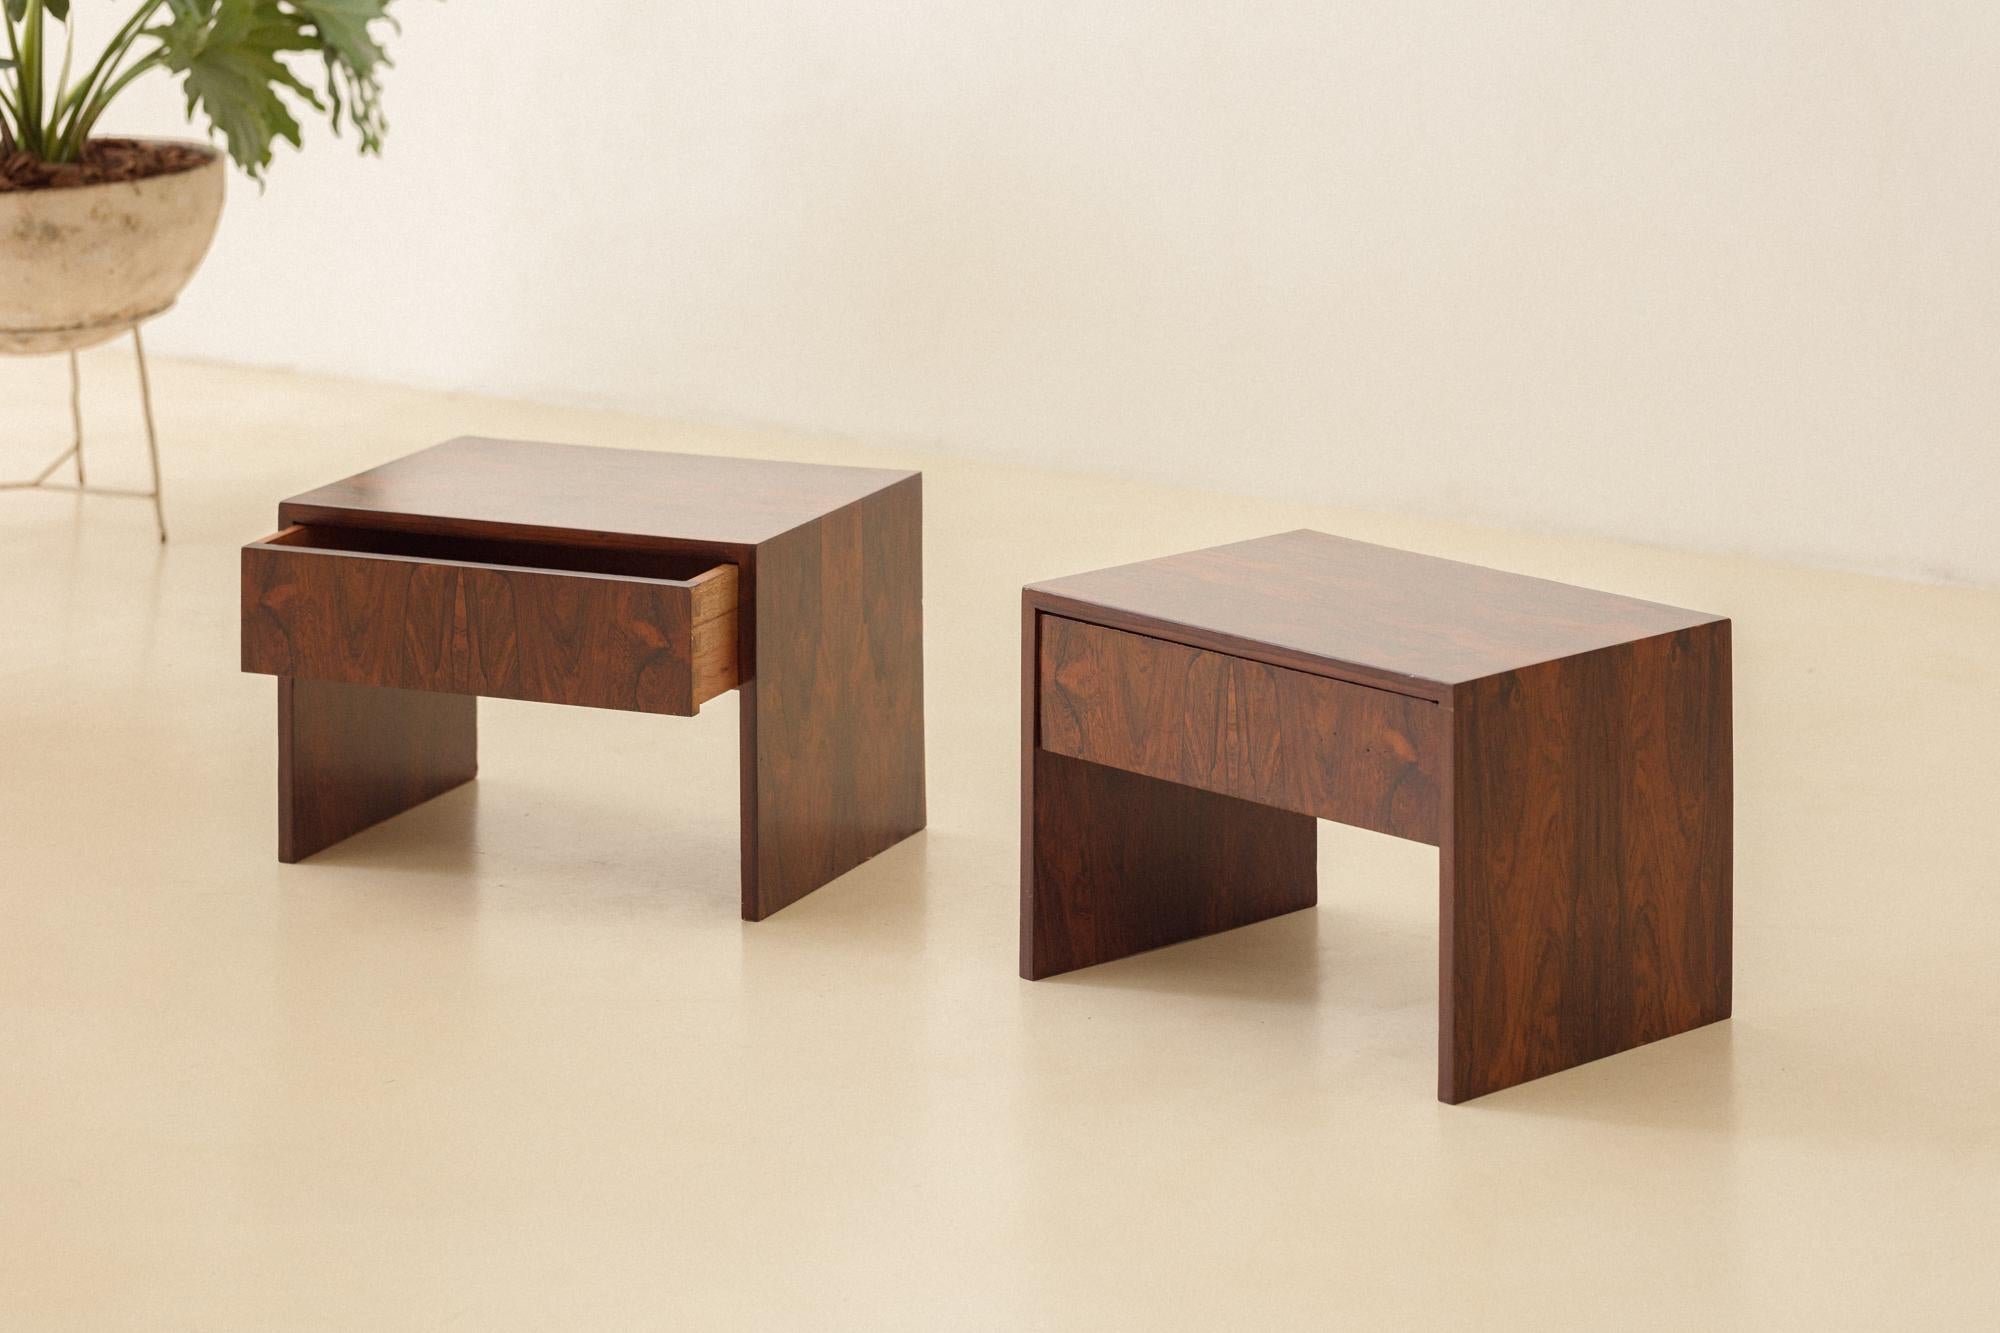 Pair of Rosewood Nightstands by Unknown Designer, 1960s, Brazilian Midcentury For Sale 1